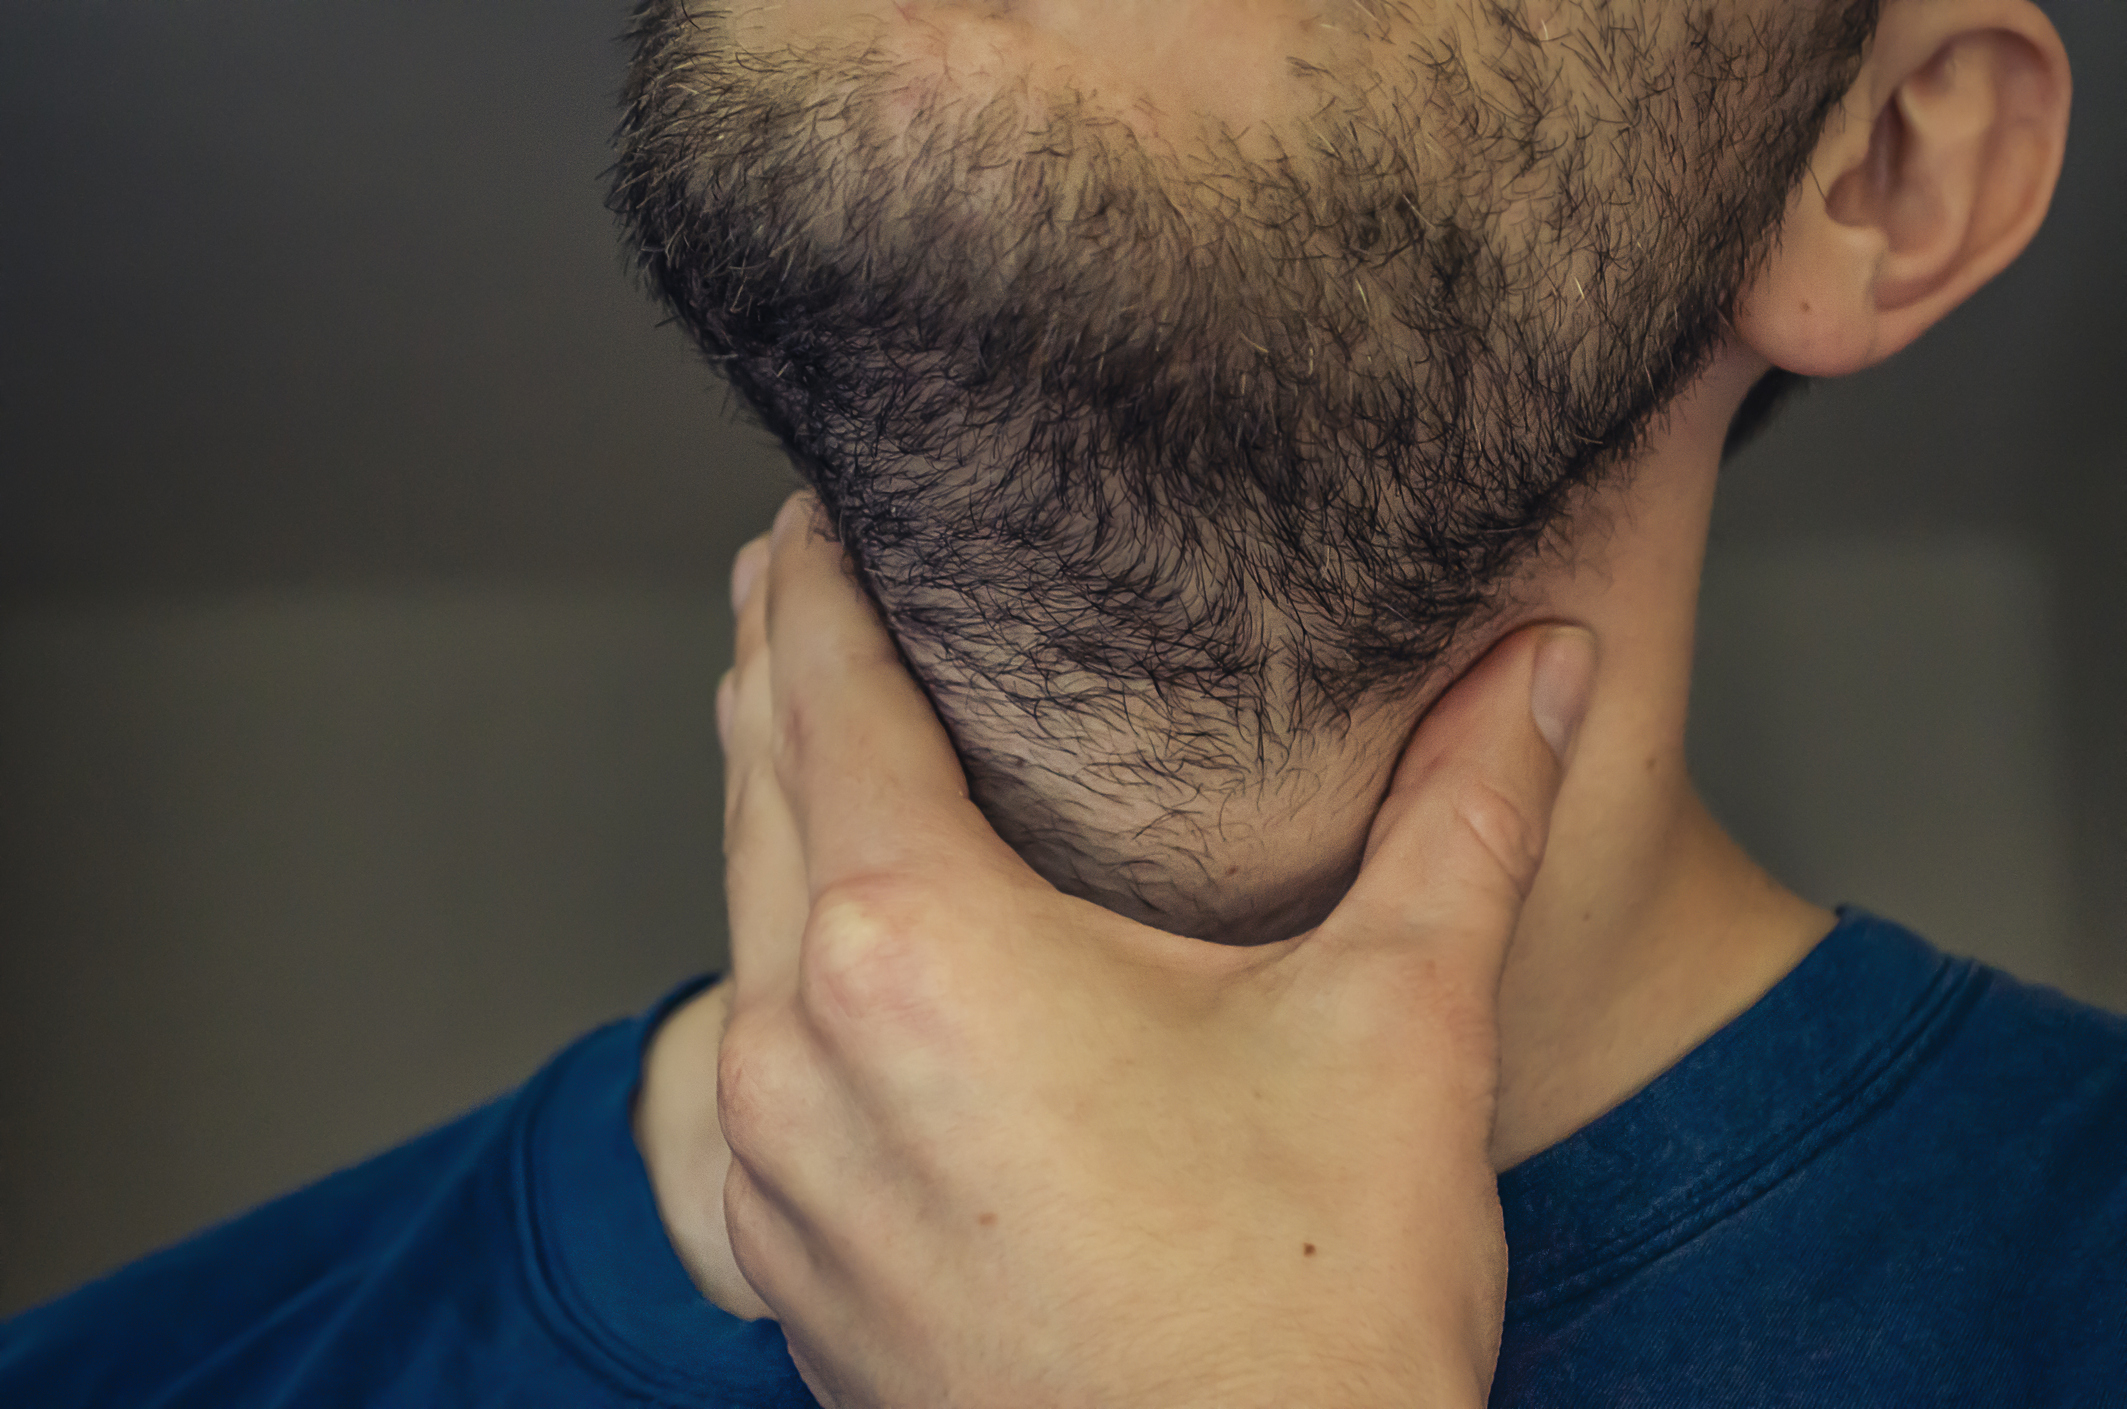 Close-up of a person holding the back of their neck, emotions or discomfort possibly implied